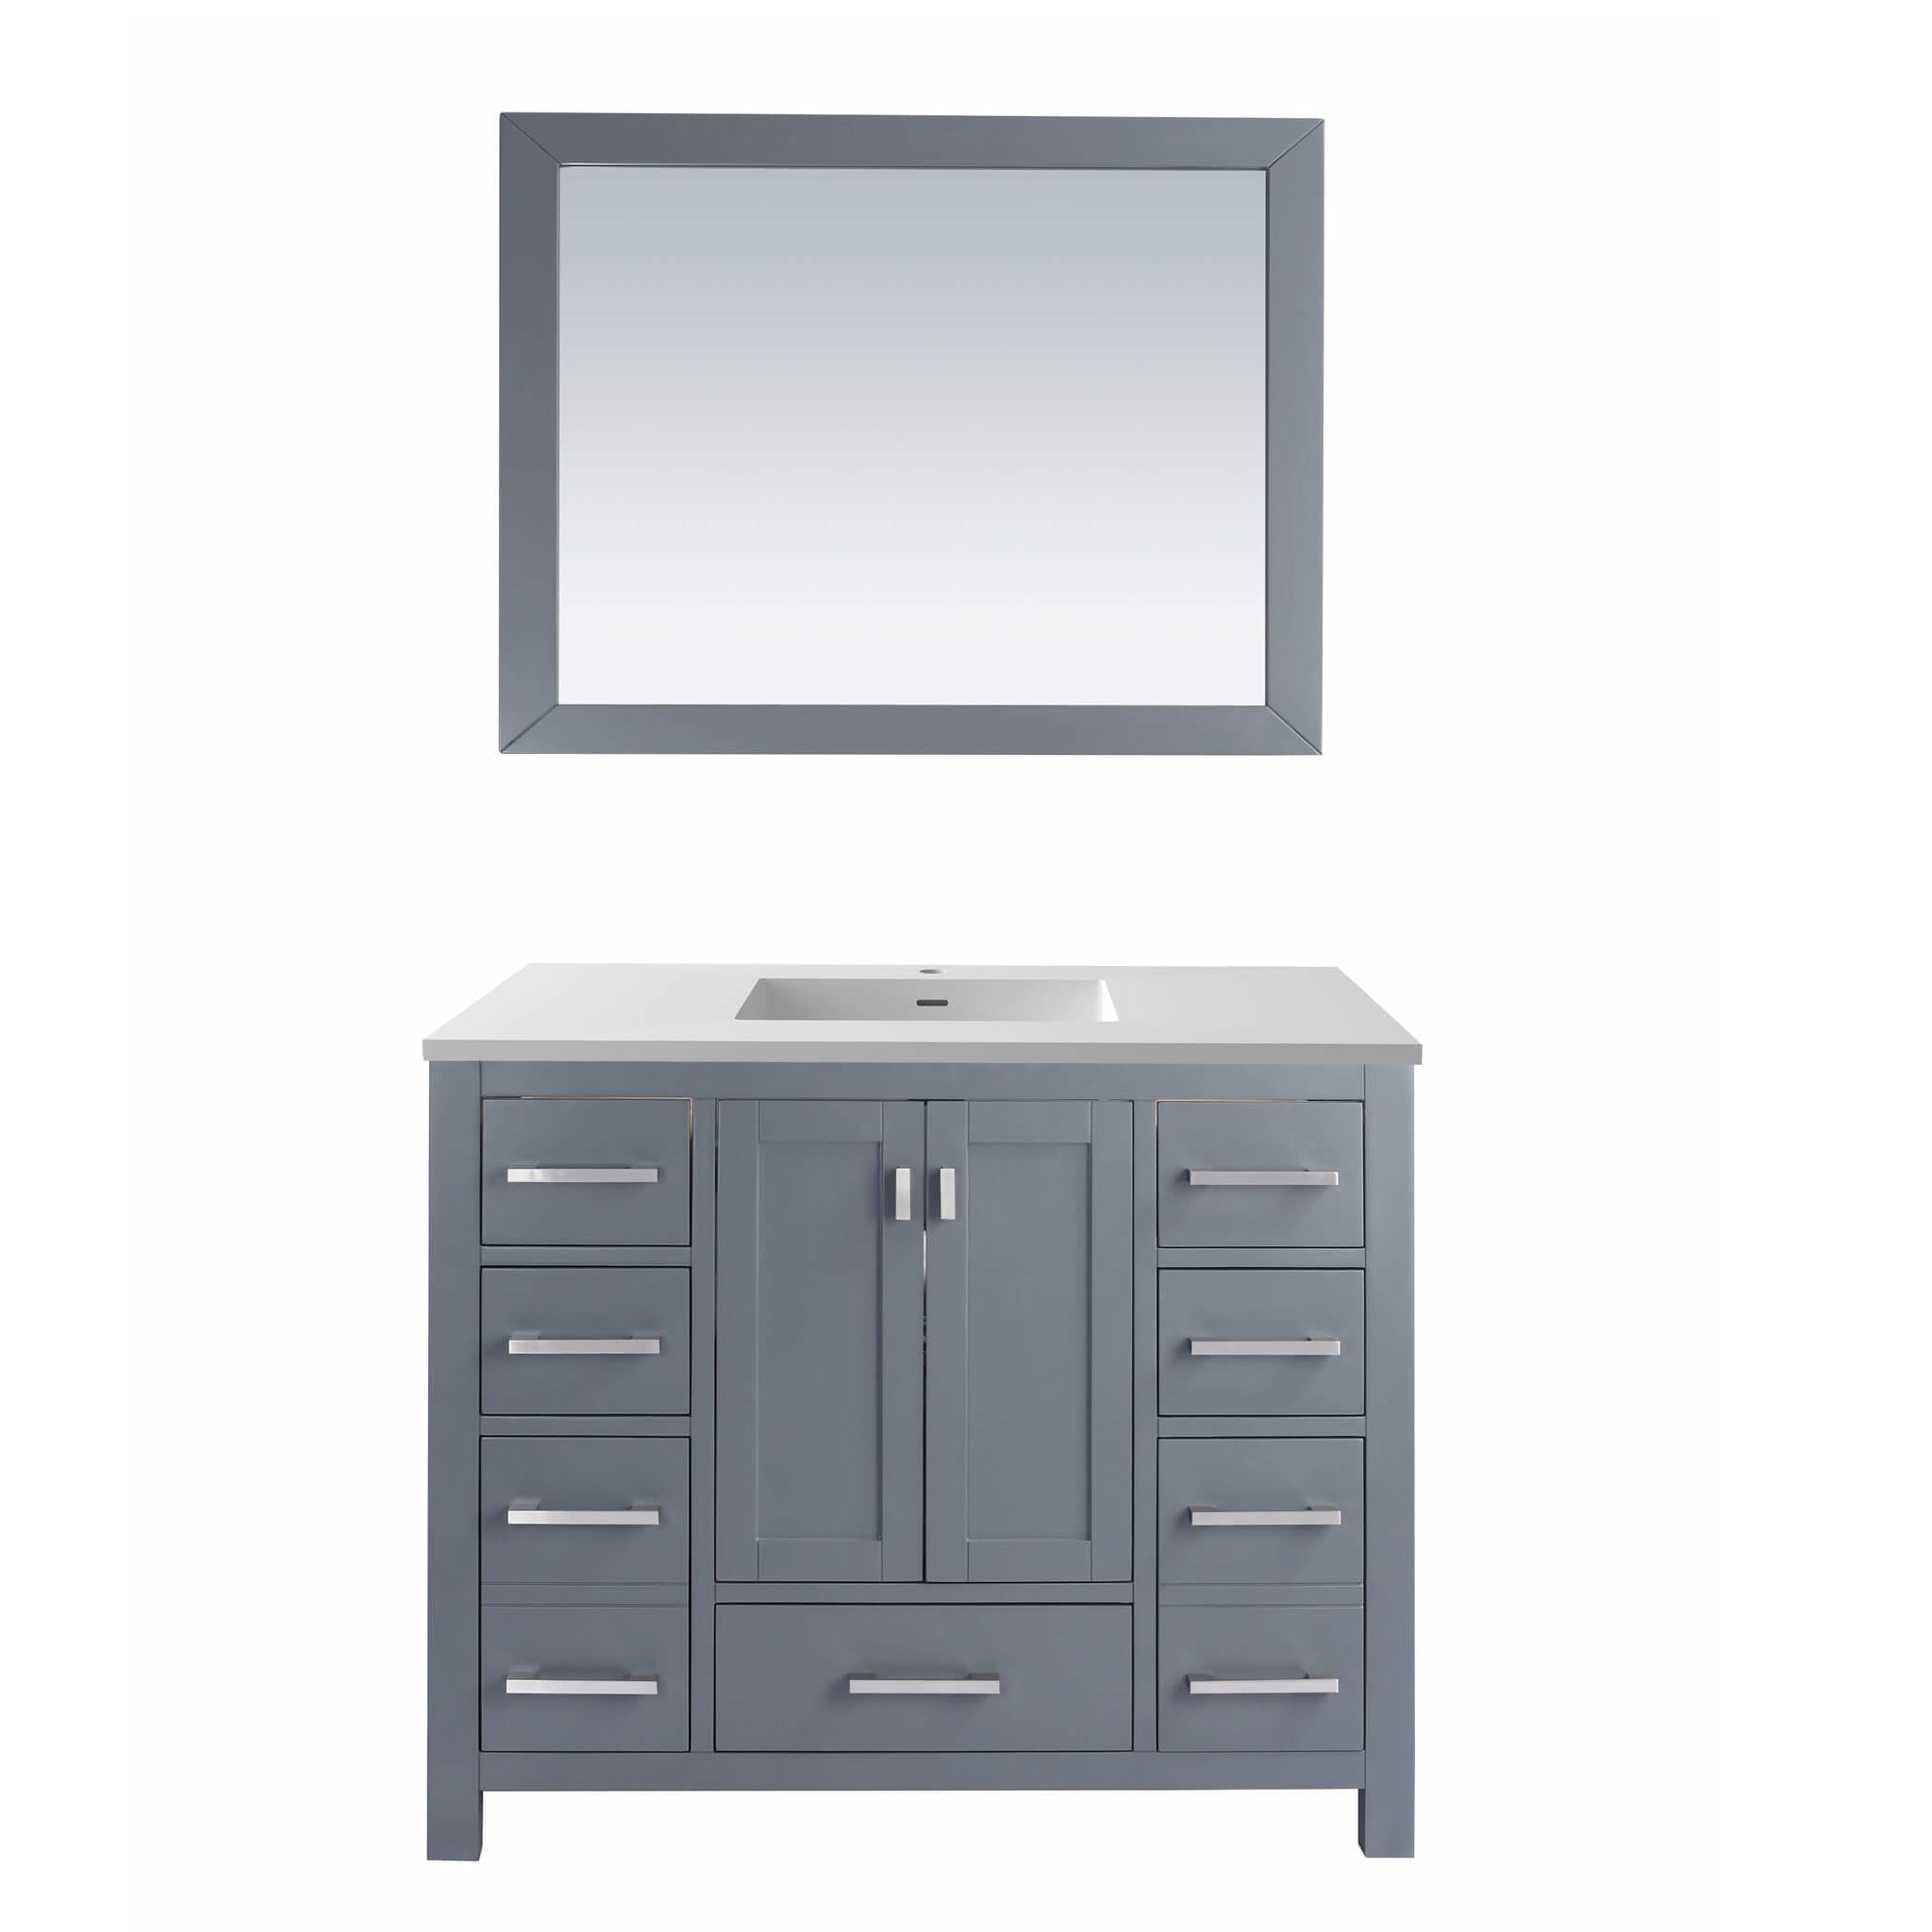 LAVIVA Wilson 313ANG-42G-MW 42" Single Bathroom Vanity in Grey with Matte White VIVA Stone Surface, Integrated Sink, Front View